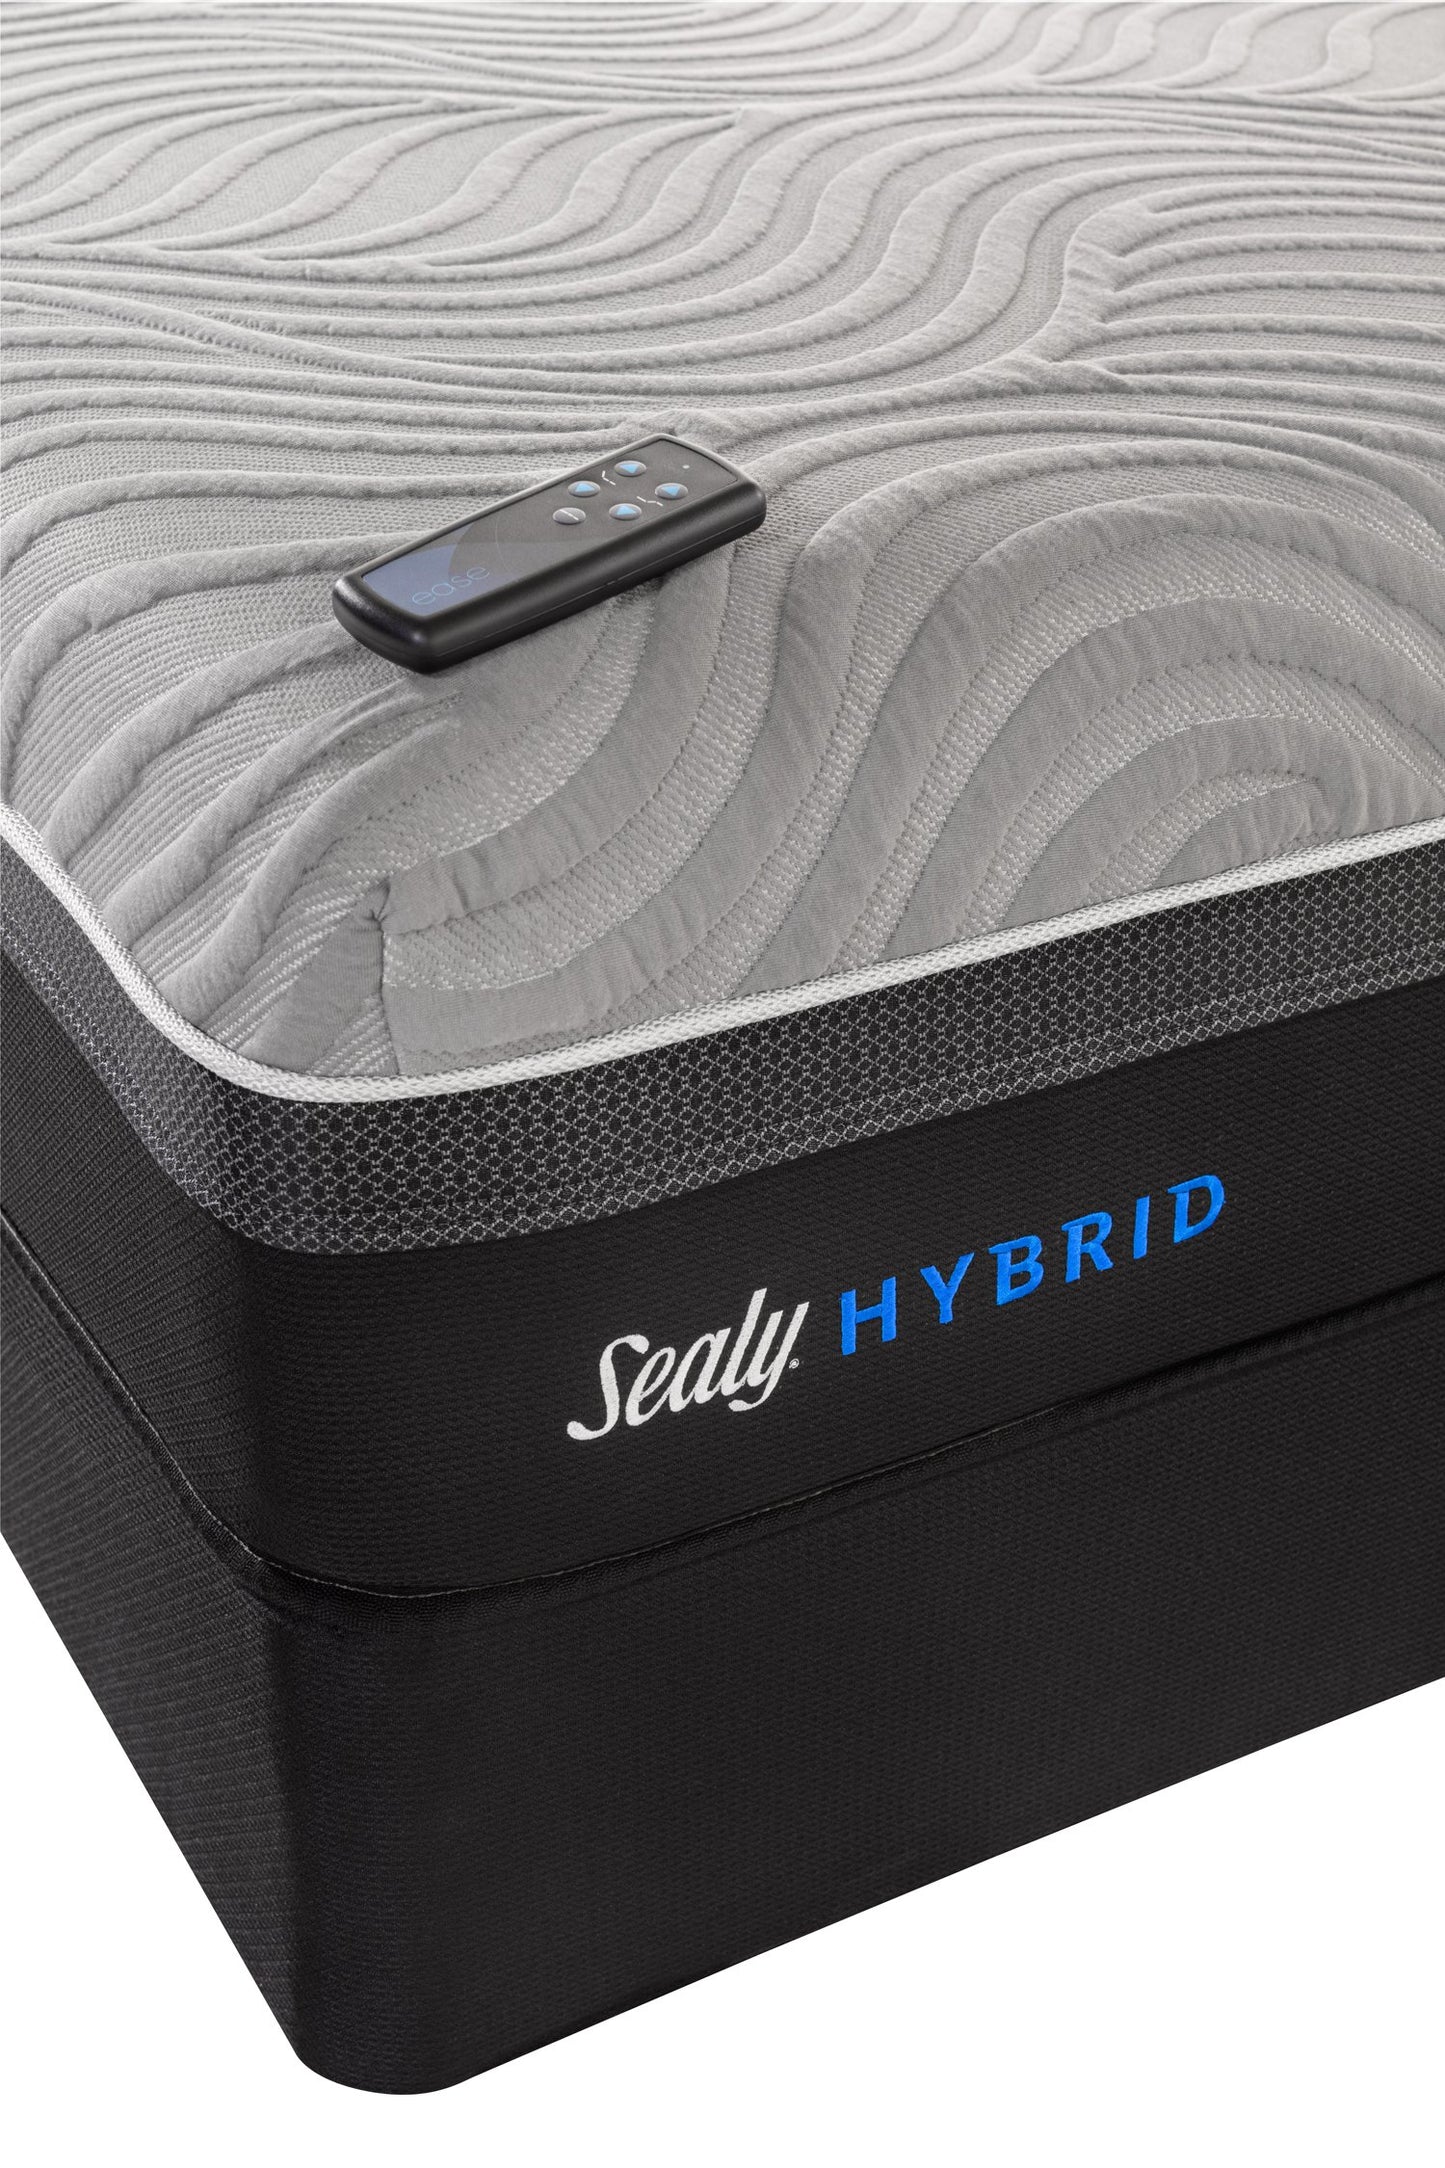 Sealy Posturepedic Hybrid Performance Copper II Firm Mattress with Remote